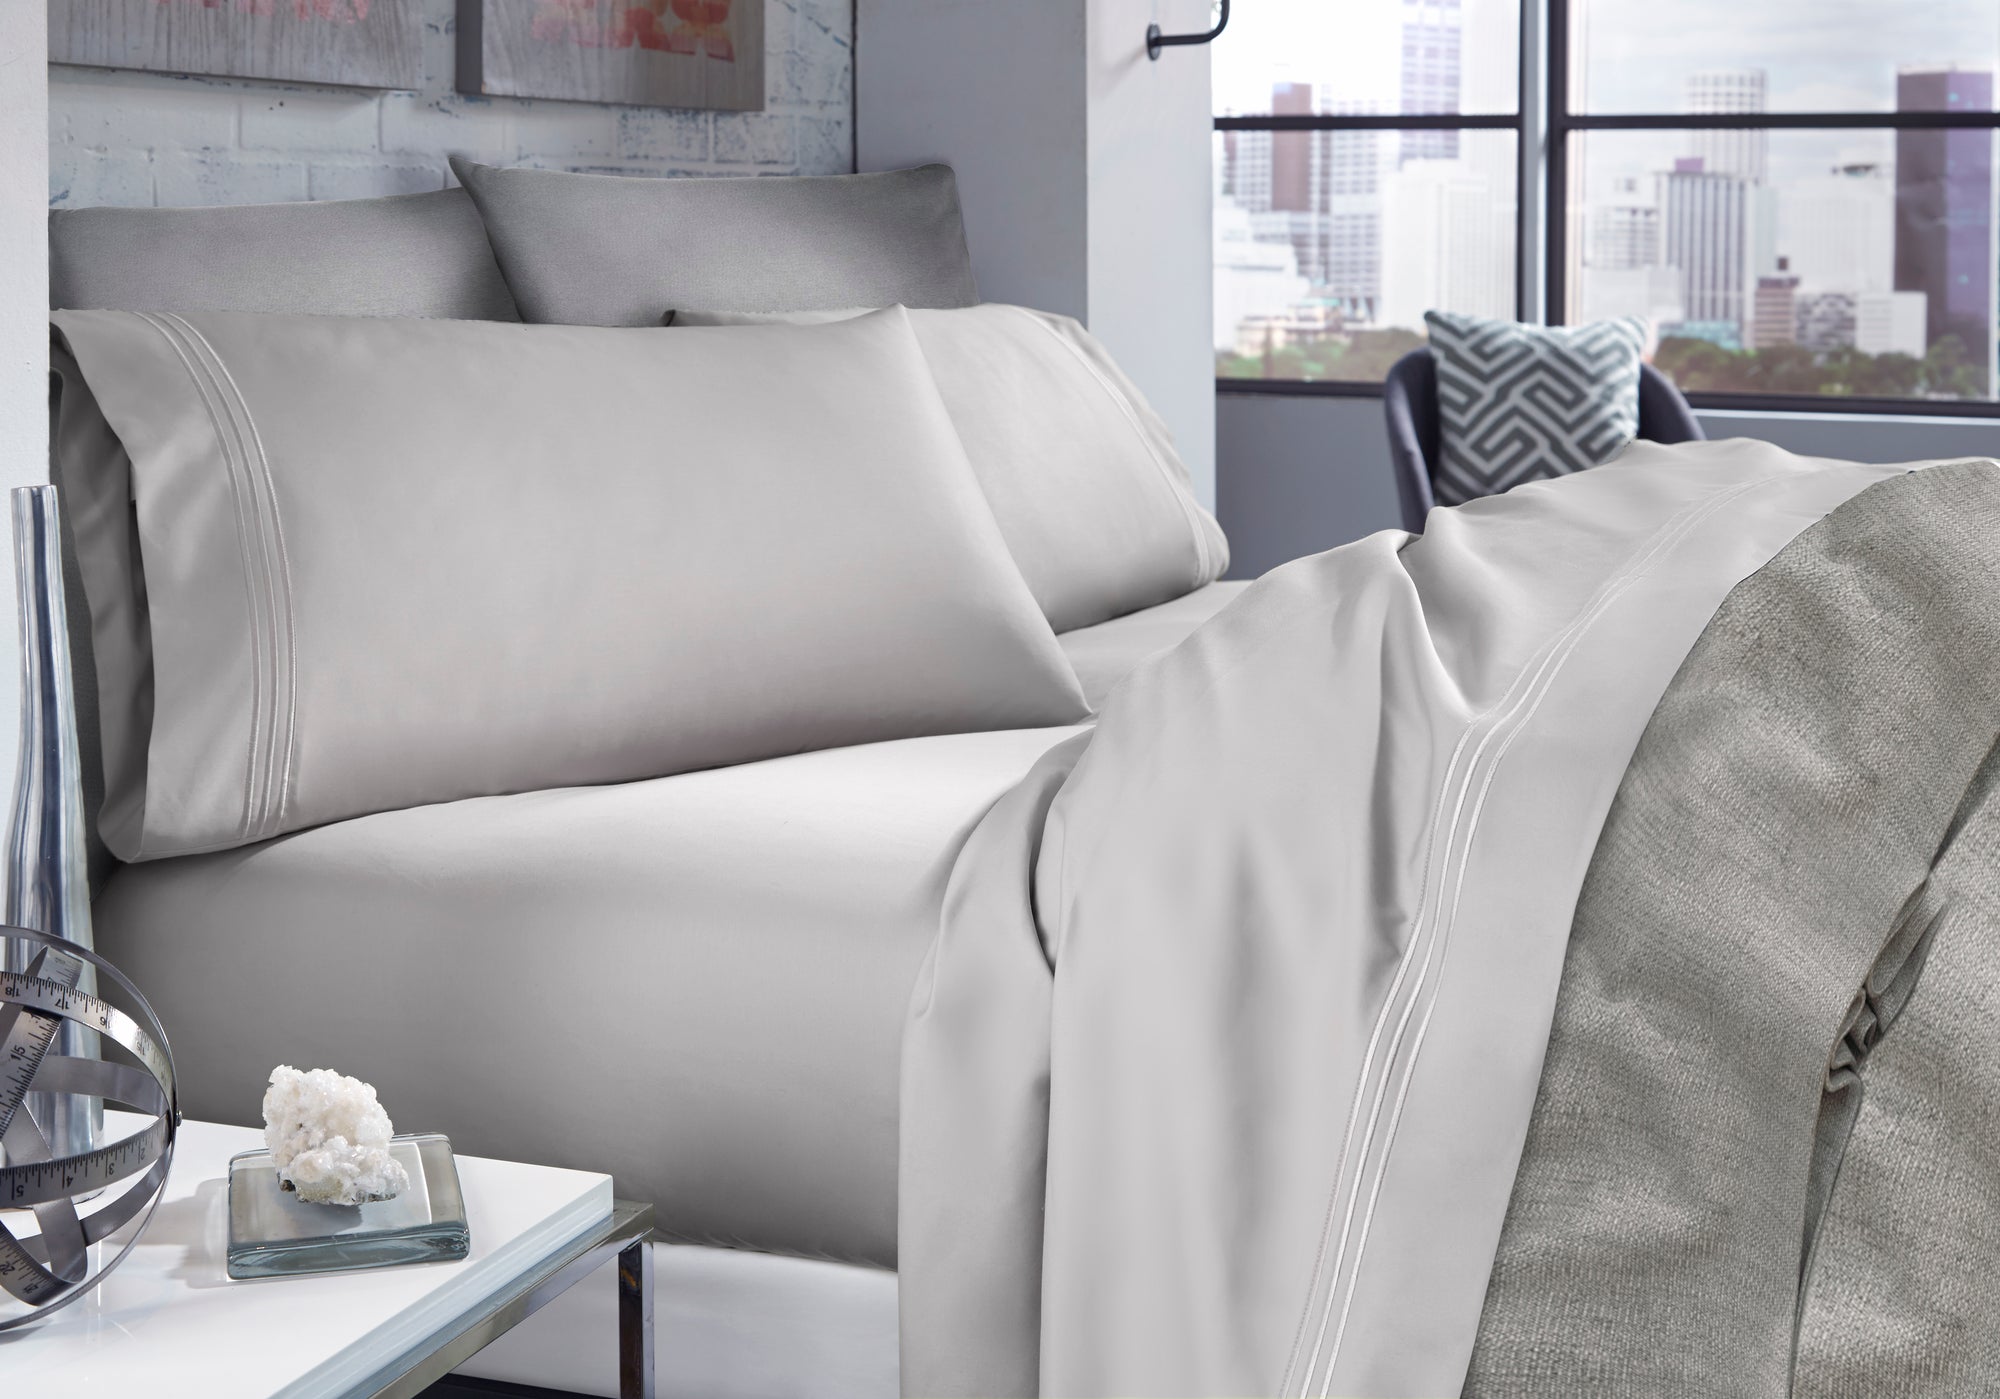 The Go-To Bedding Size Chart for Effortless Linen Shopping